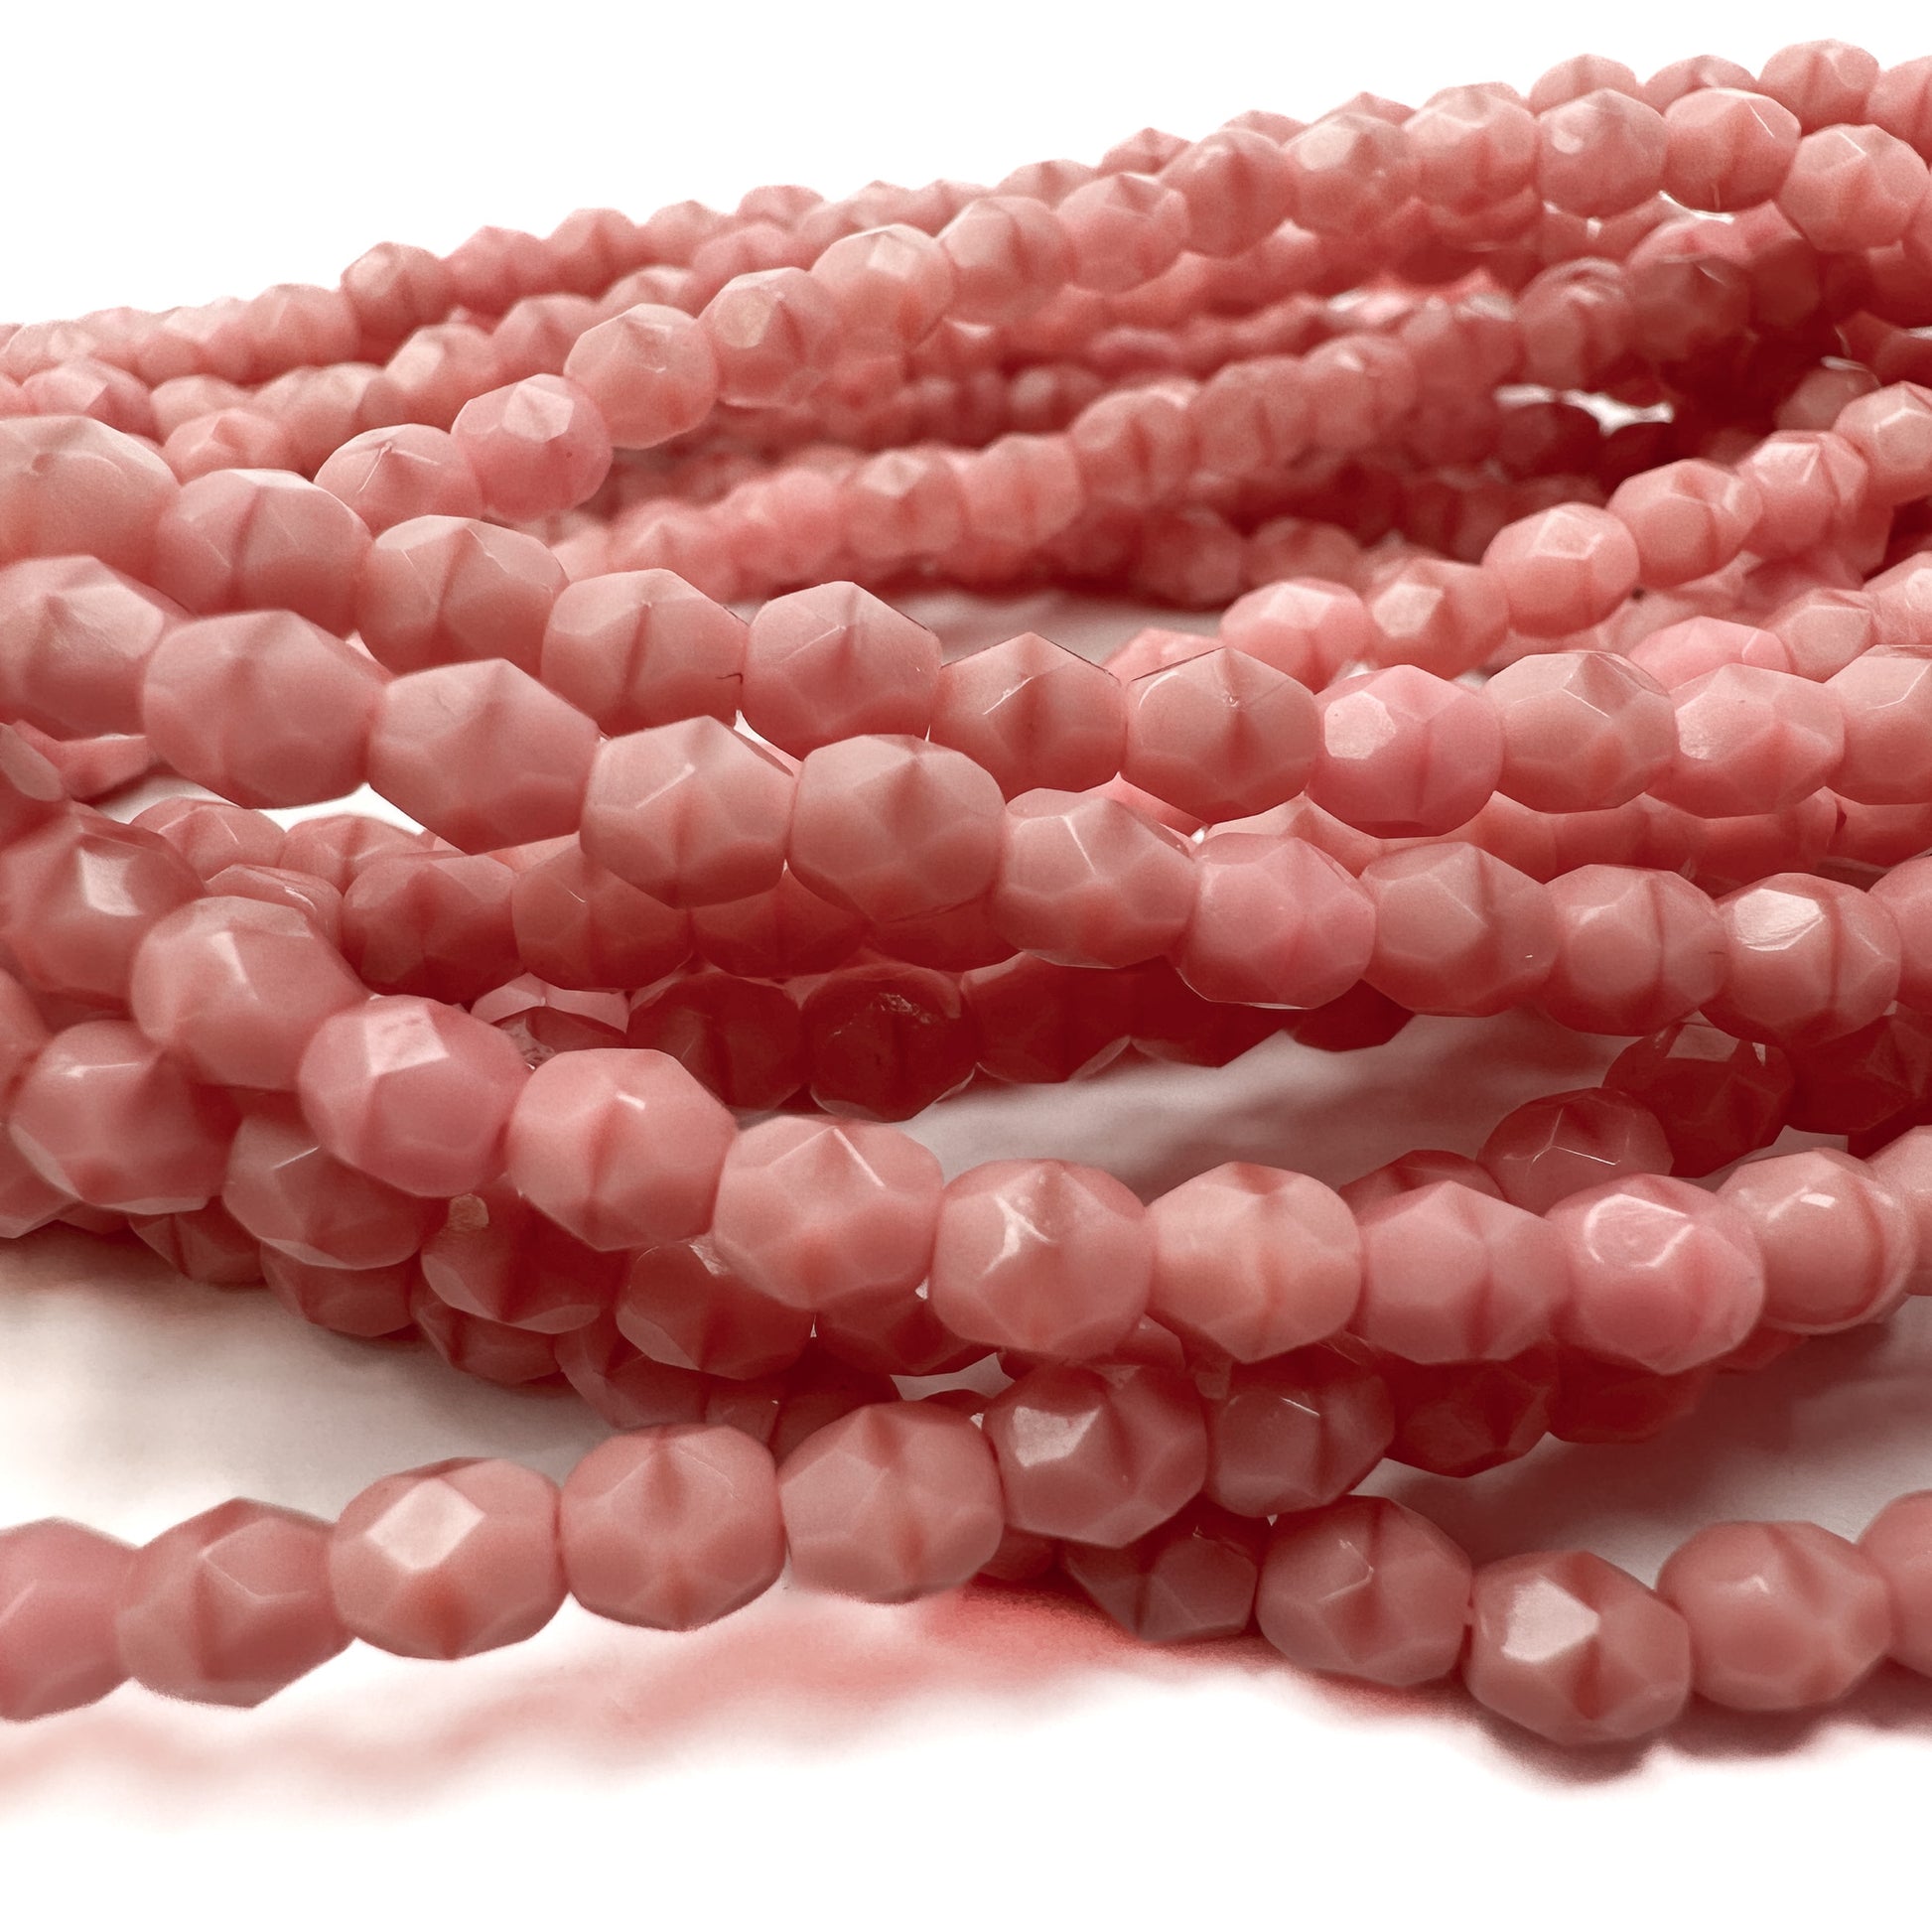 Pink Silk 4mm Faceted Glass Bead - 50 pcs.-The Bead Gallery Honolulu